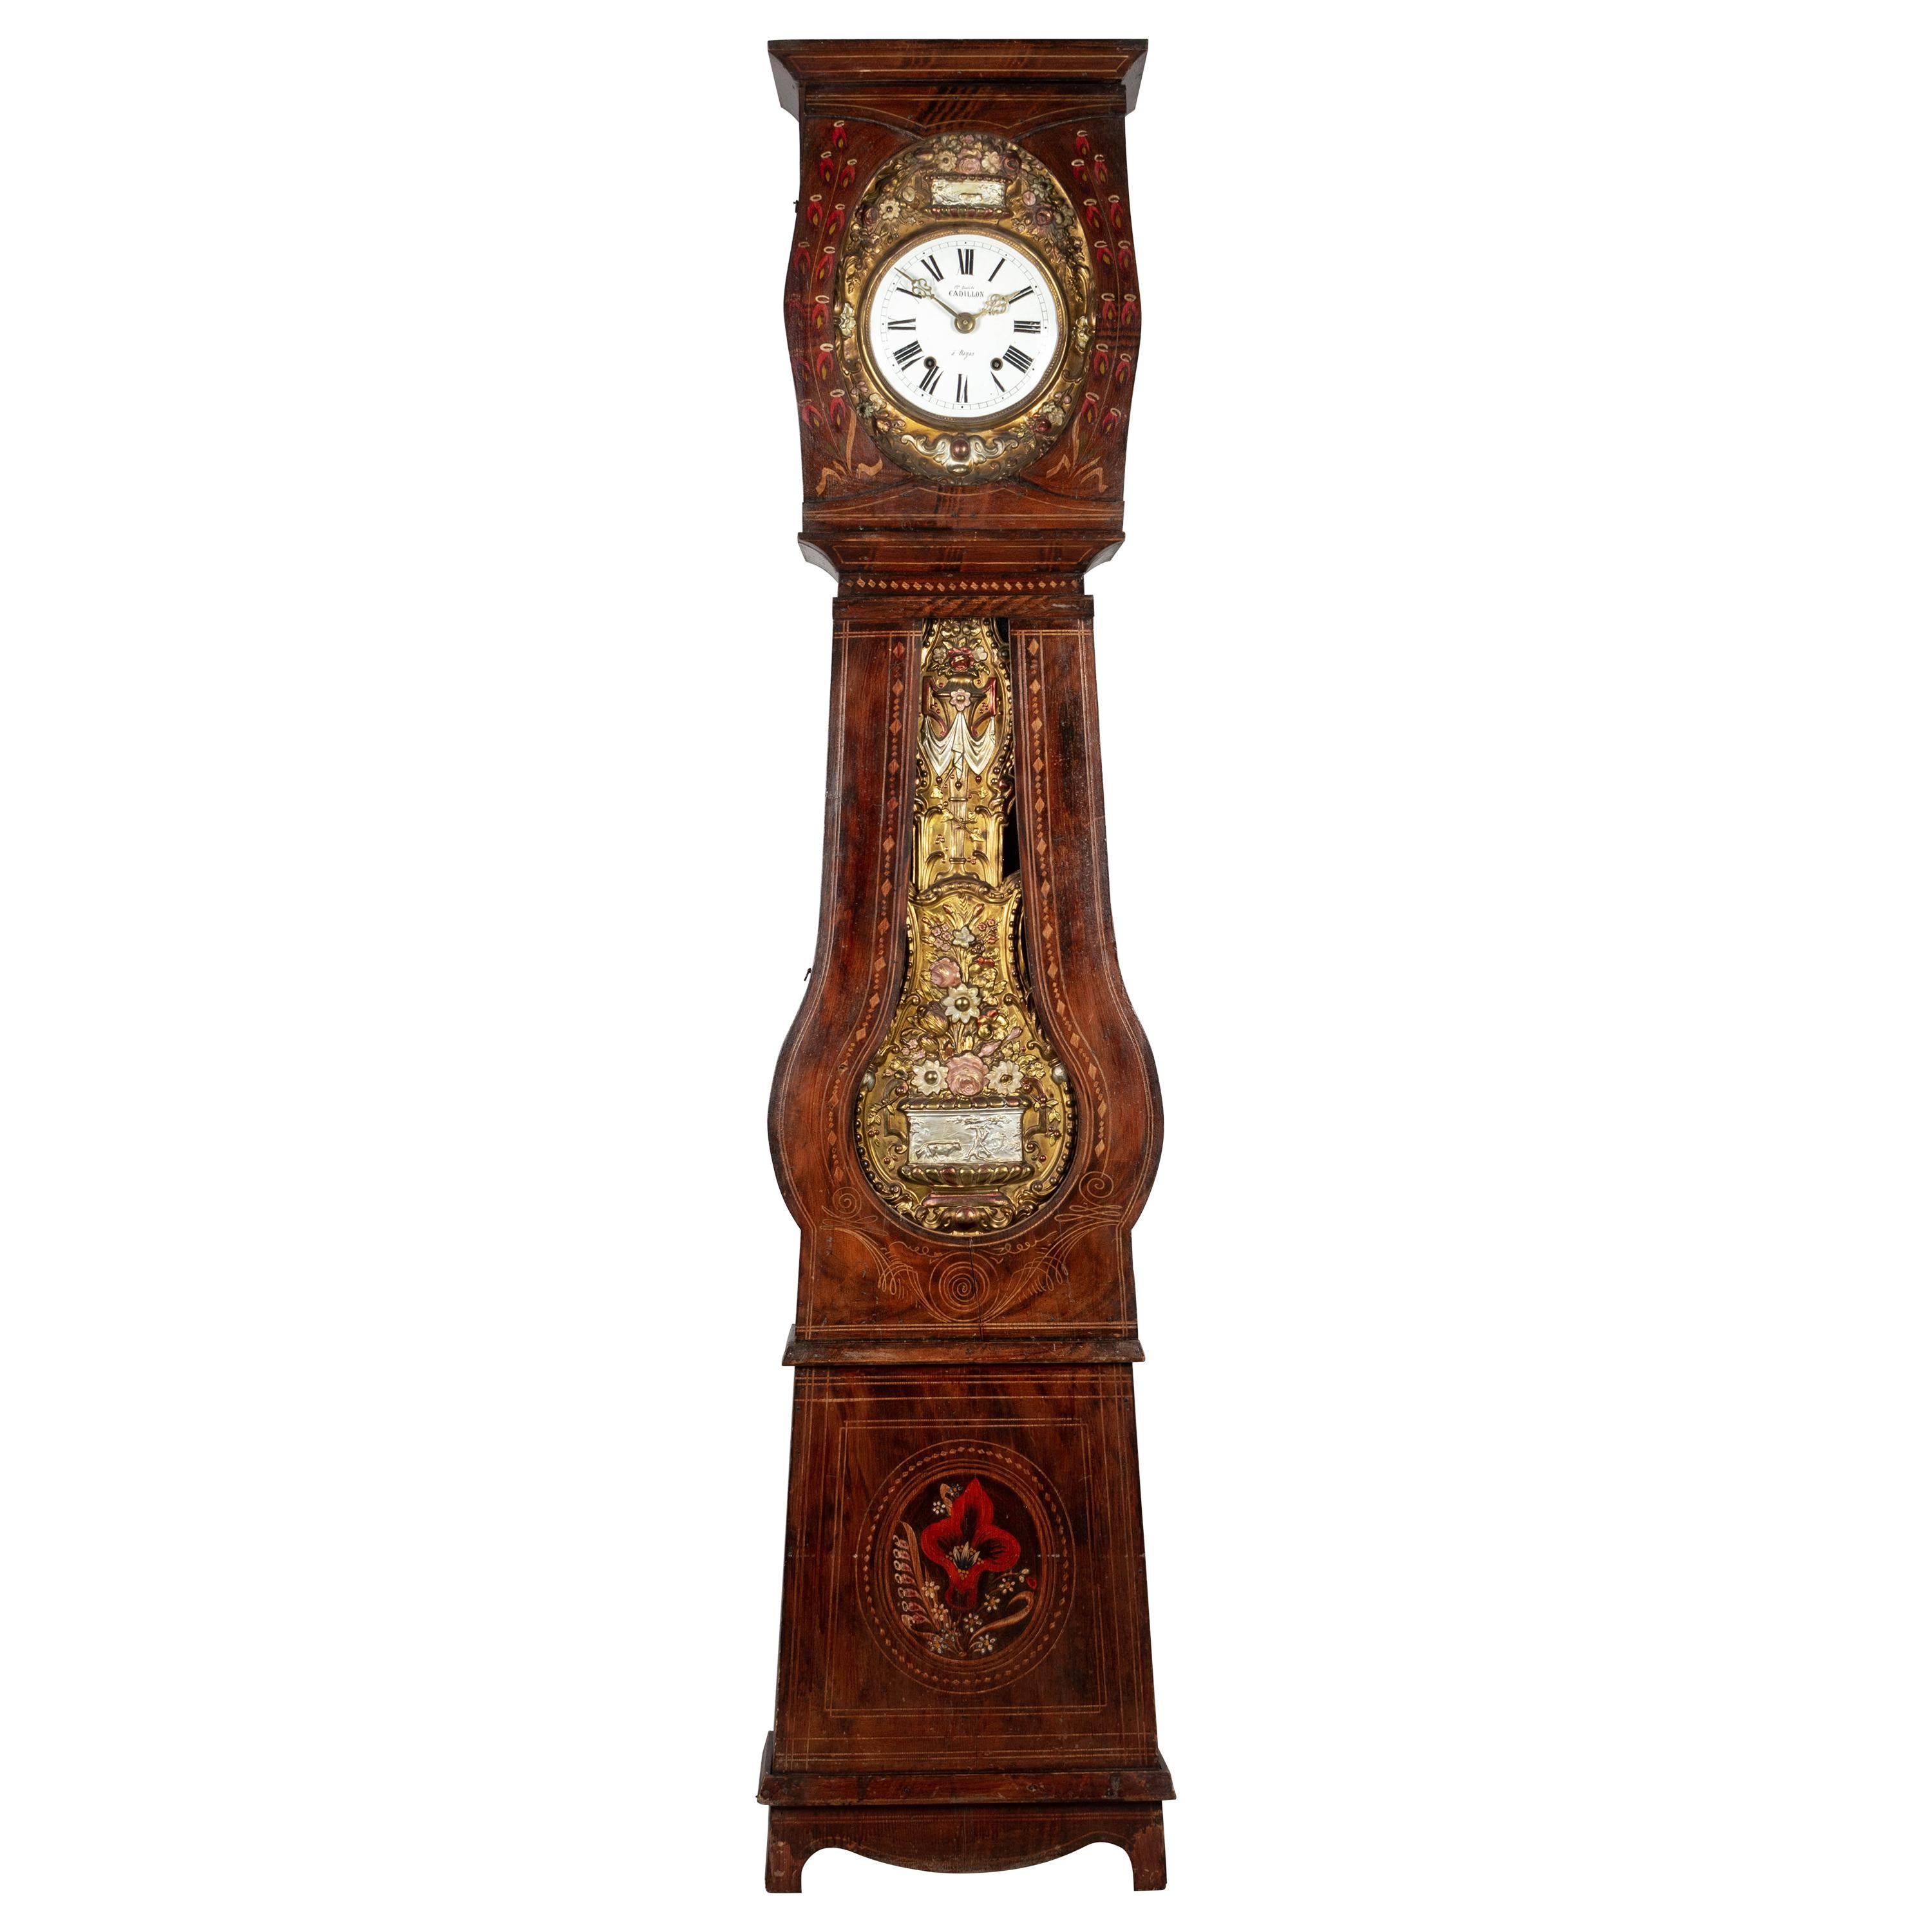 19th Century French Comtoise Grandfather Clock